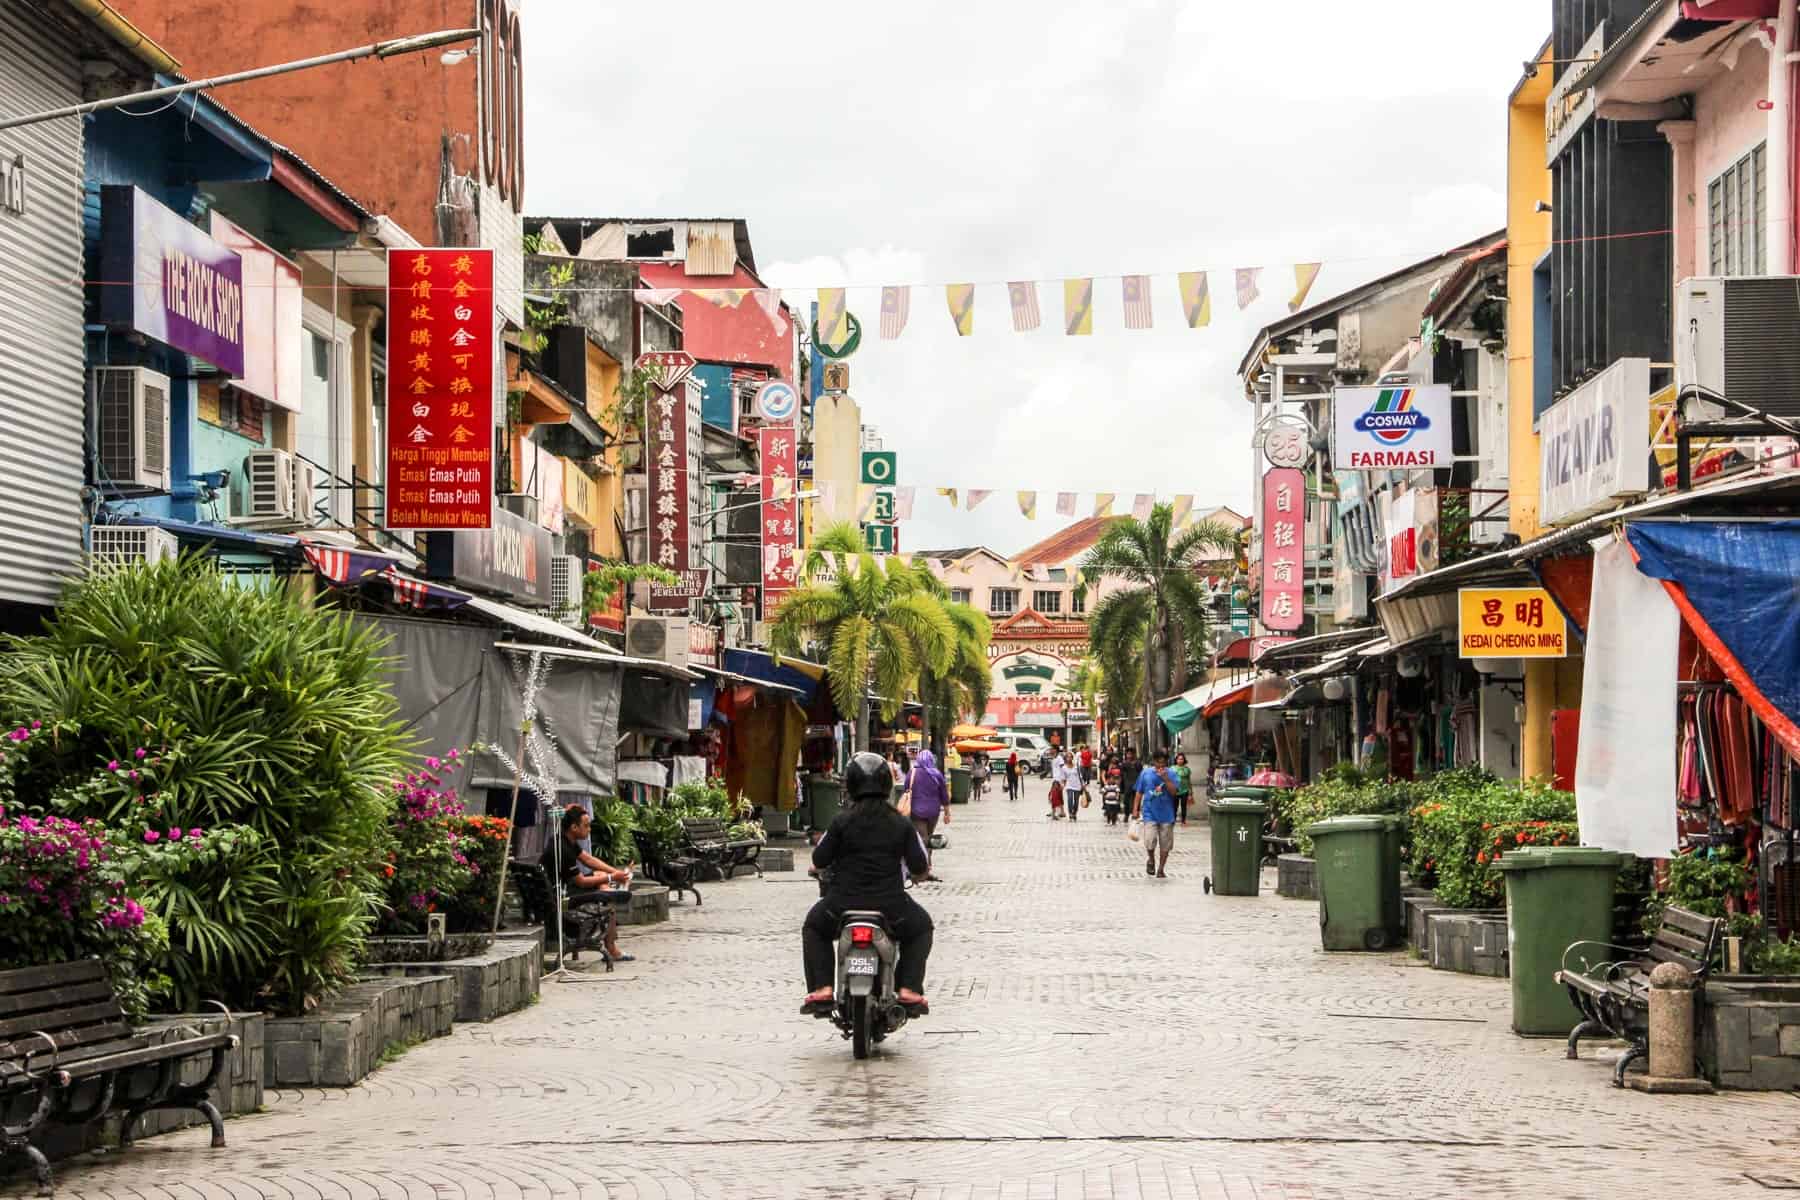 A man rides a motorcycle down a paved street in Kuching Sarawak, lined with local stores and decorated overhead with colourful bunting